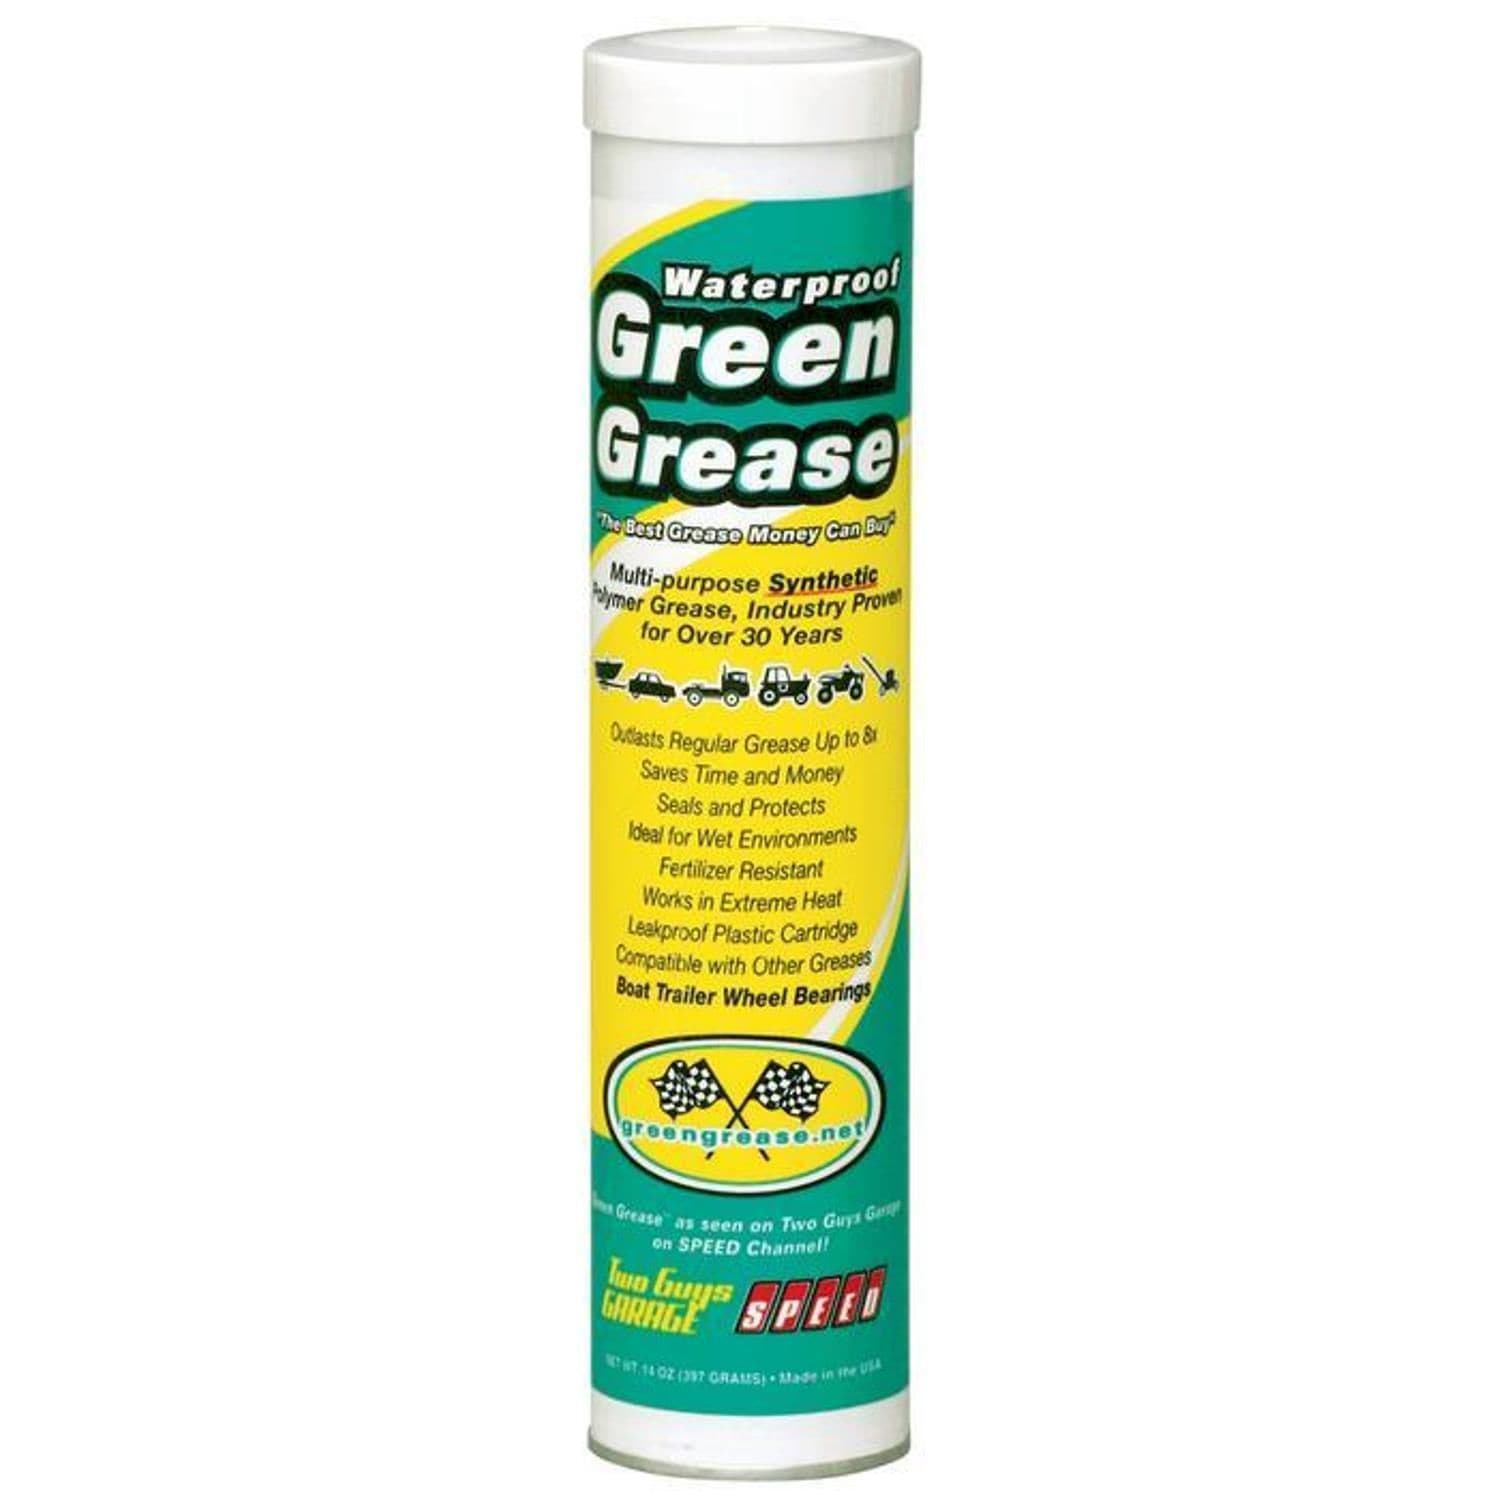 AGL 101 Green Grease Waterproof Multi-Purpose HD EP Synthetic Polymer Grease (14 oz)